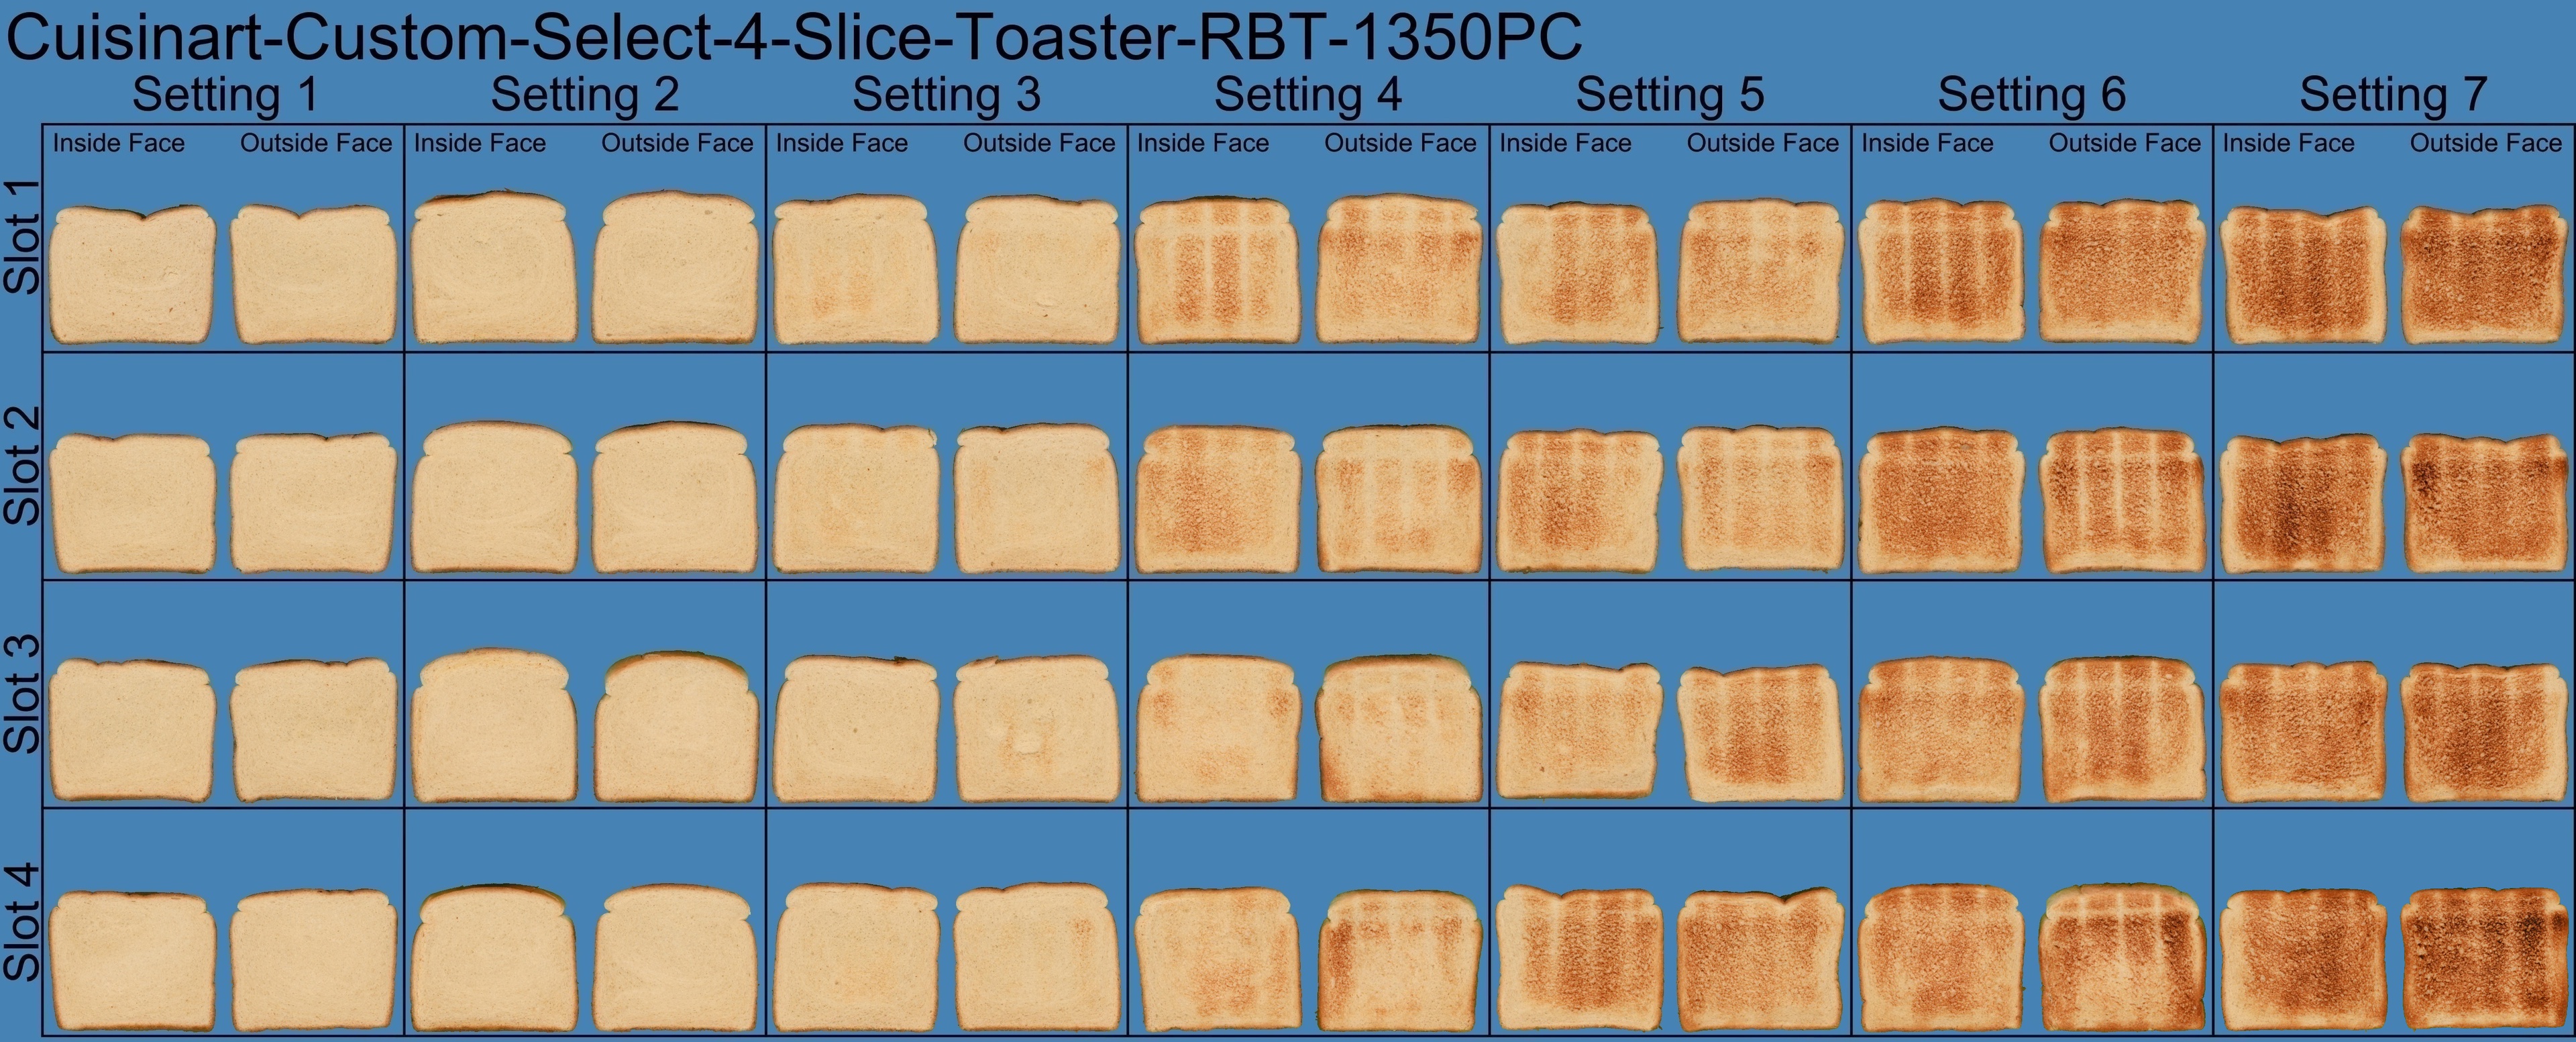 https://www.rtings.com/assets/products/AIGNjAG0/cuisinart-custom-select-4-slice-toaster-rbt-1350pc/full-range-montage-large.jpg